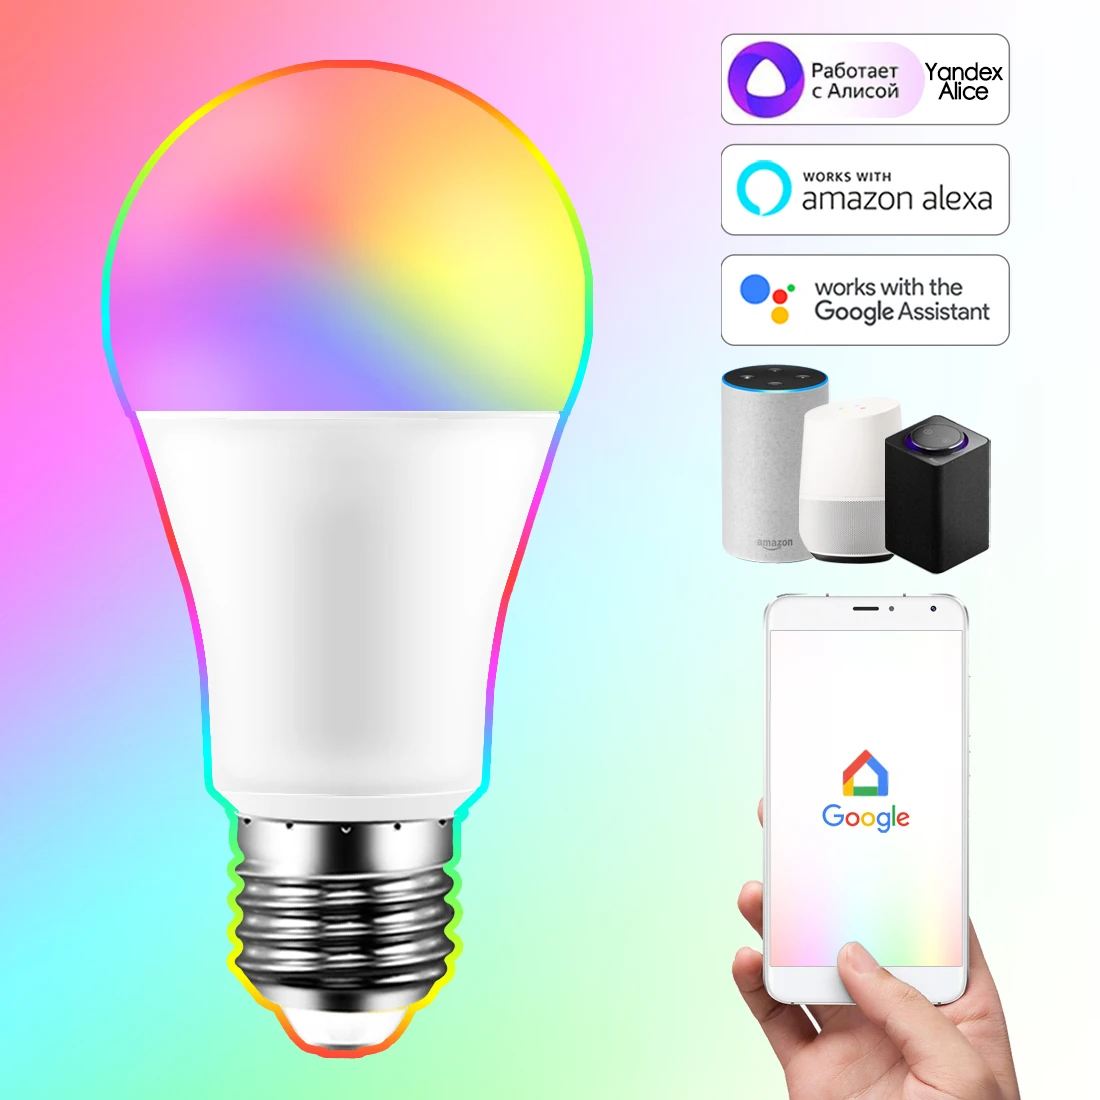 WiFi Smart Light Bulb 15W E27 LED Lamp Color Changing Magic RGB +White Work Alexa Google Home Yandex Dimmable Timer